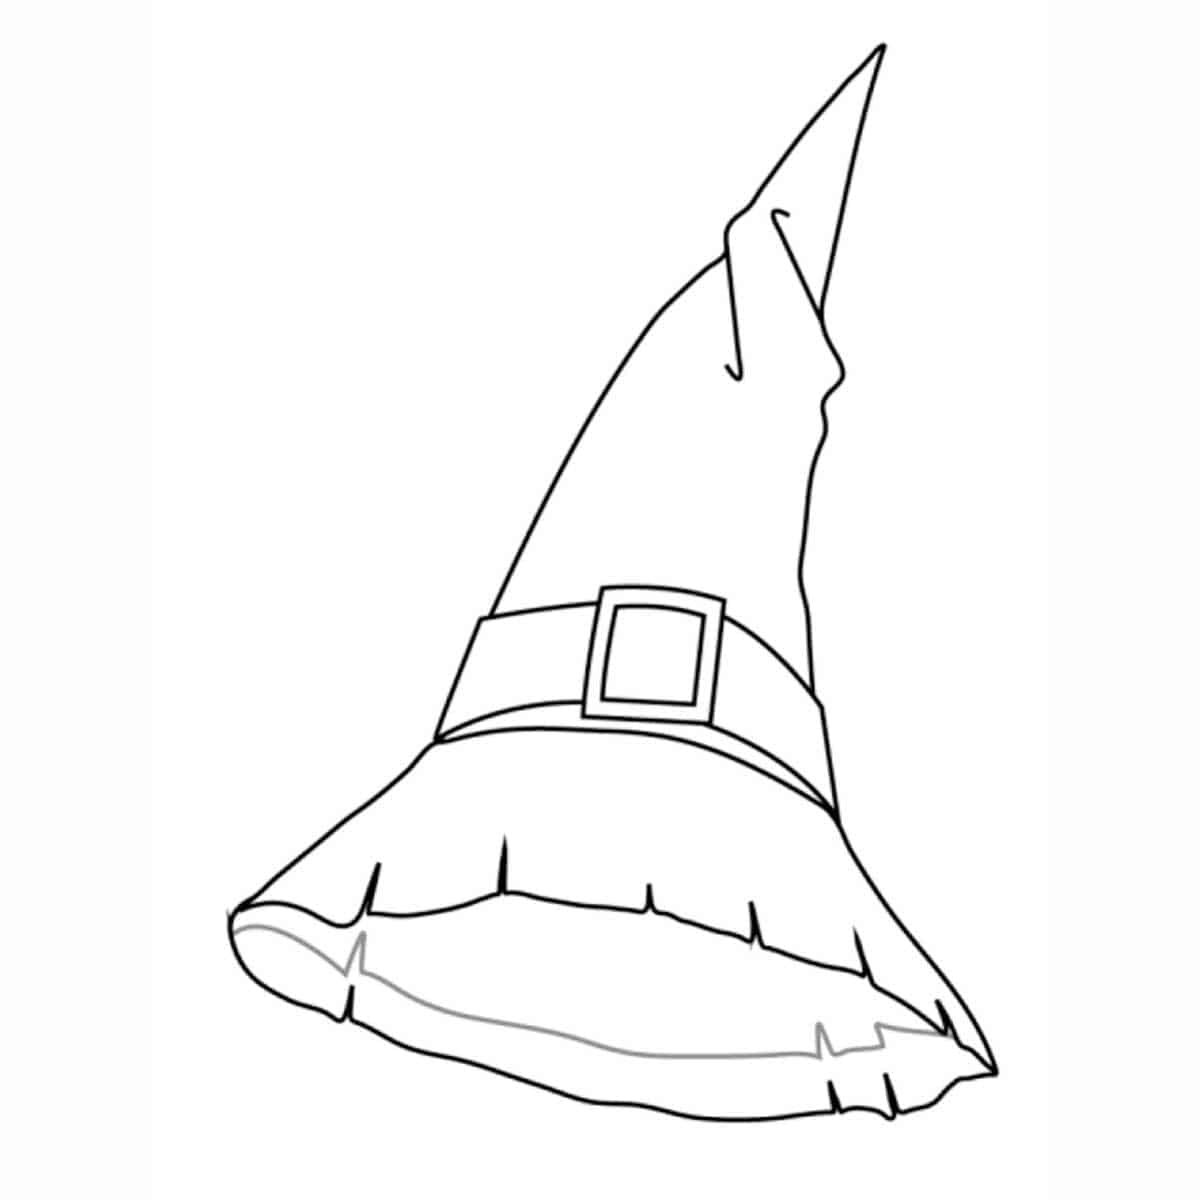 black and white drawing of a pointed witch hat by Skip to my Lou.